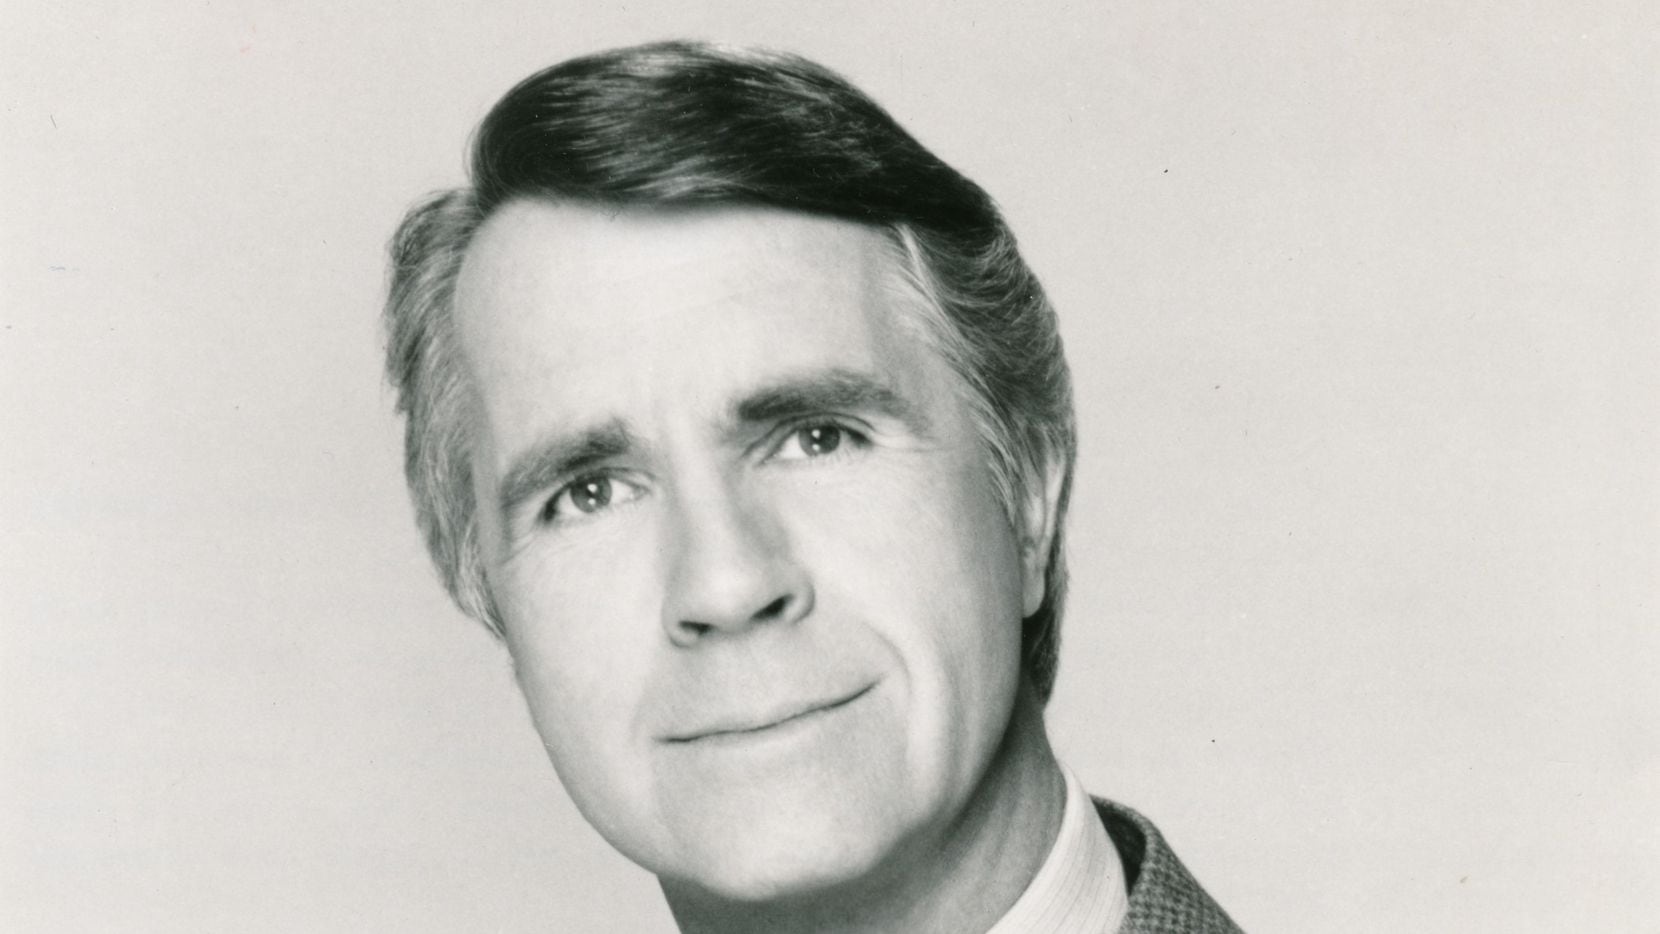 Dallas Born Actor James Noble Best Known As Absent Minded Governor On Benson Dies At 94